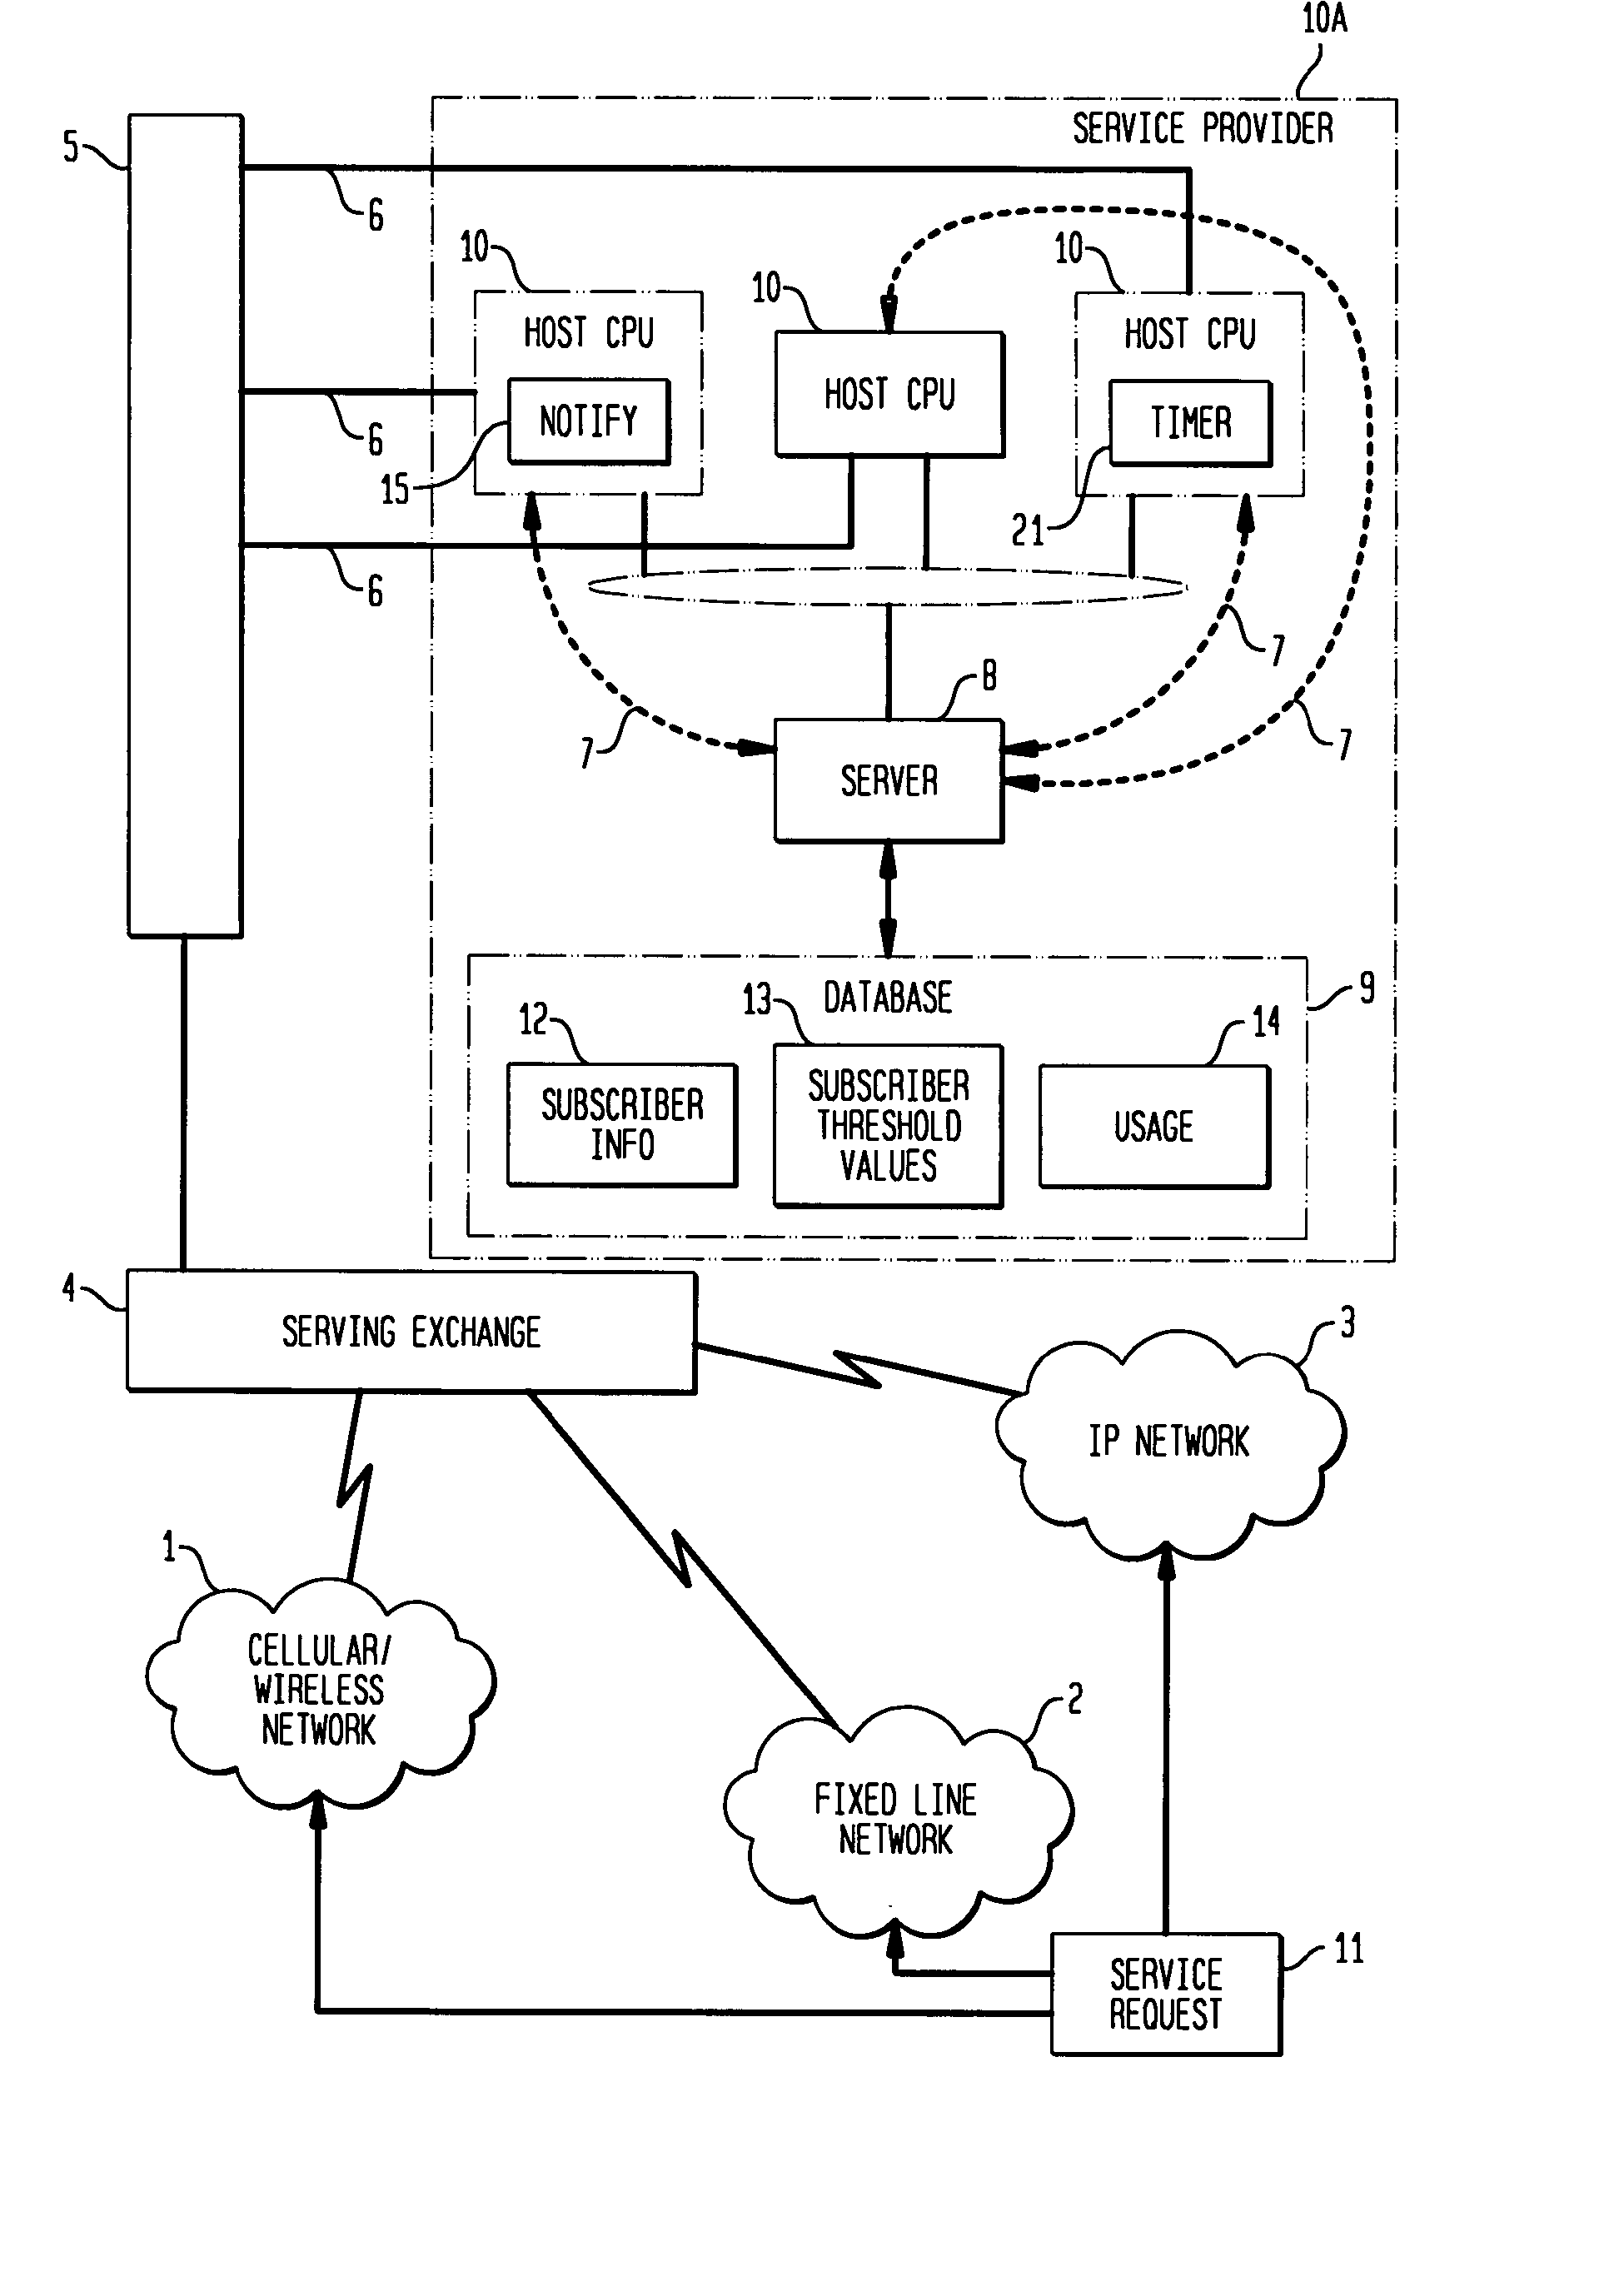 Pre-paid security mechanism in a post-pay telecommunications system